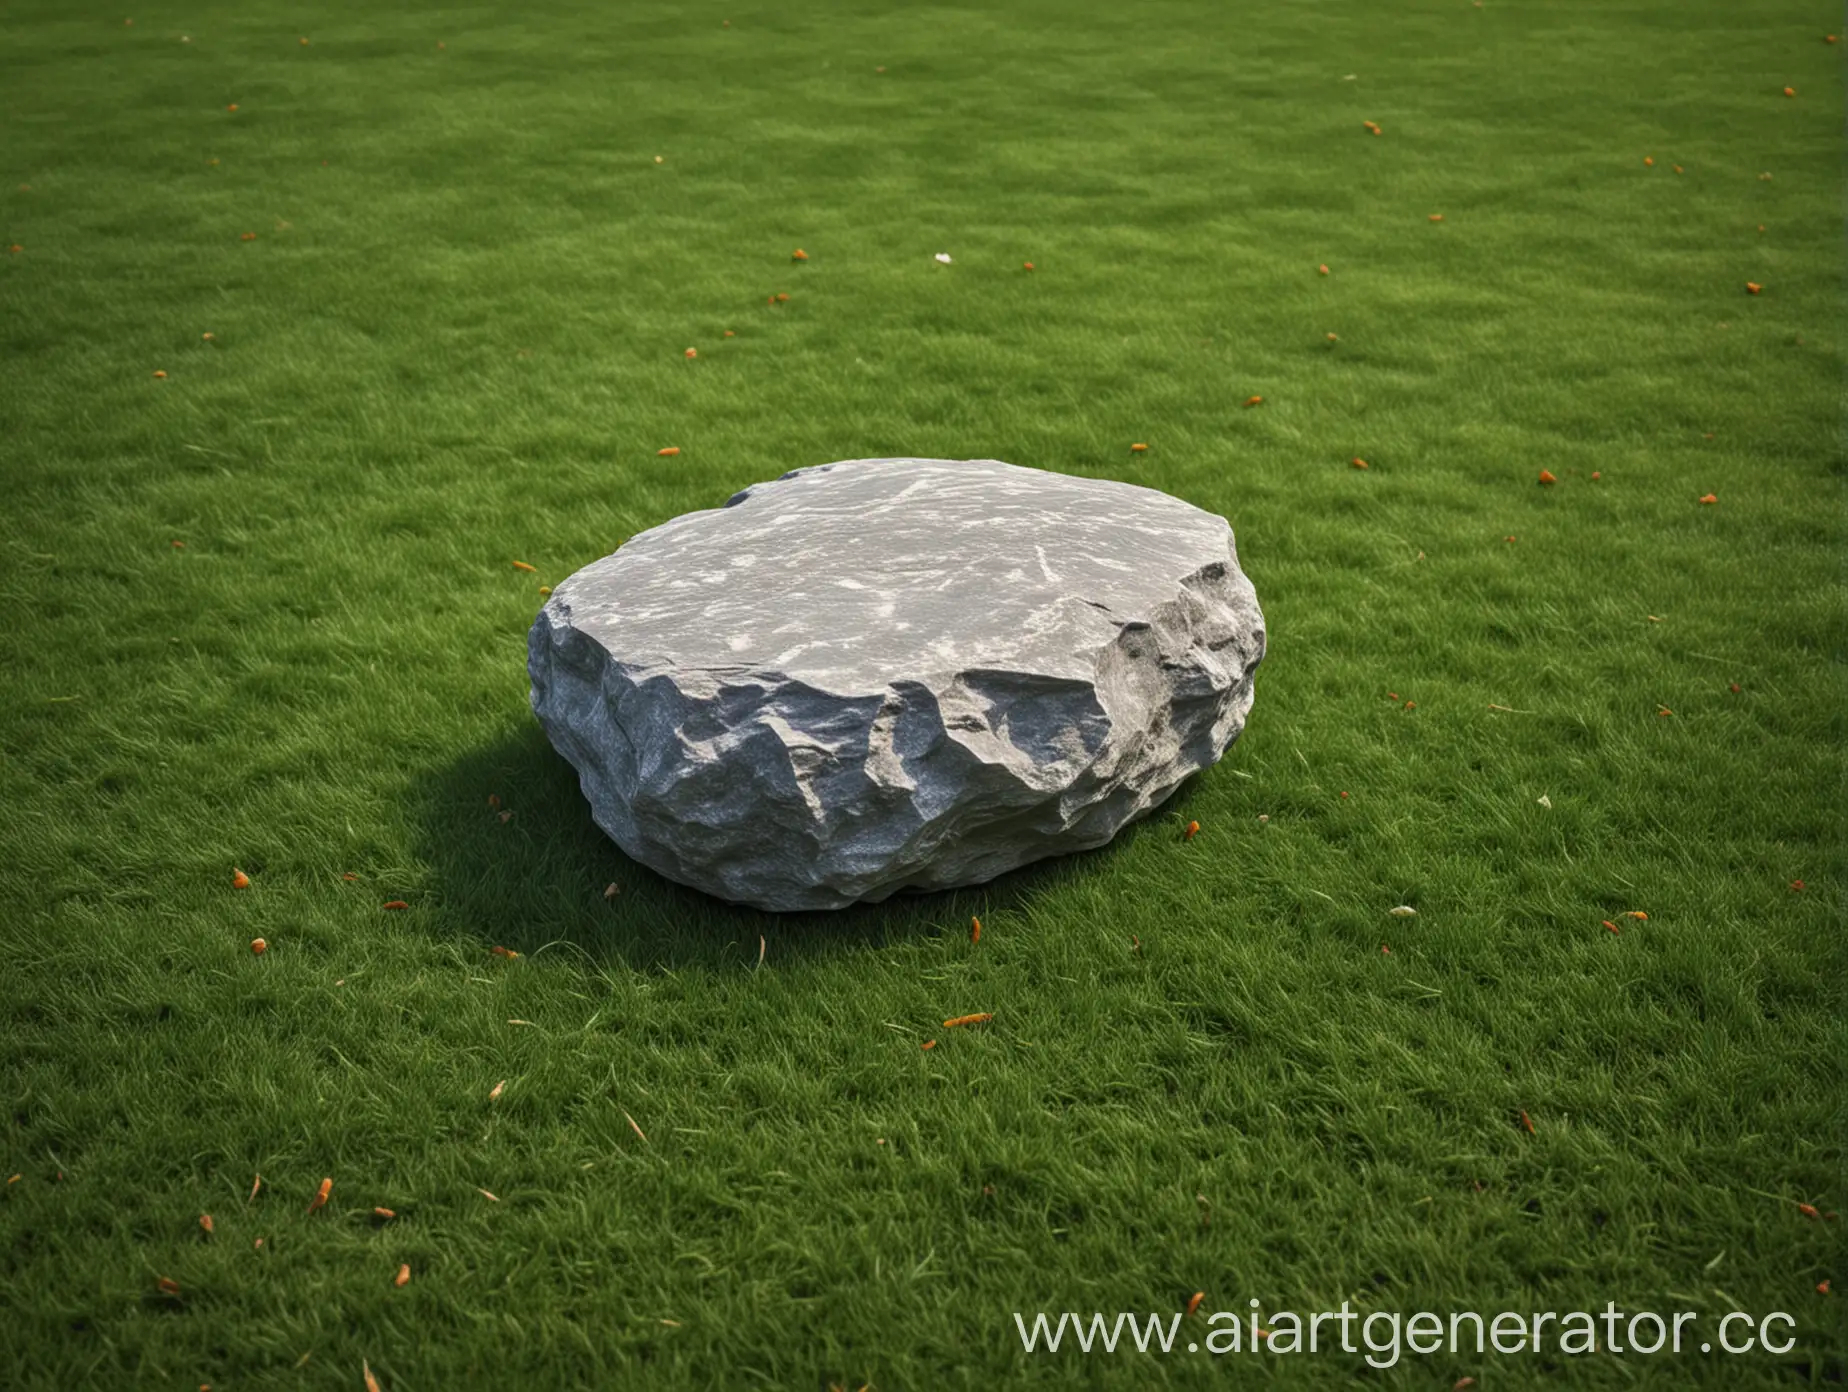 A beautiful lone stone stands on the lawn embodies tranquility hyperrealistic